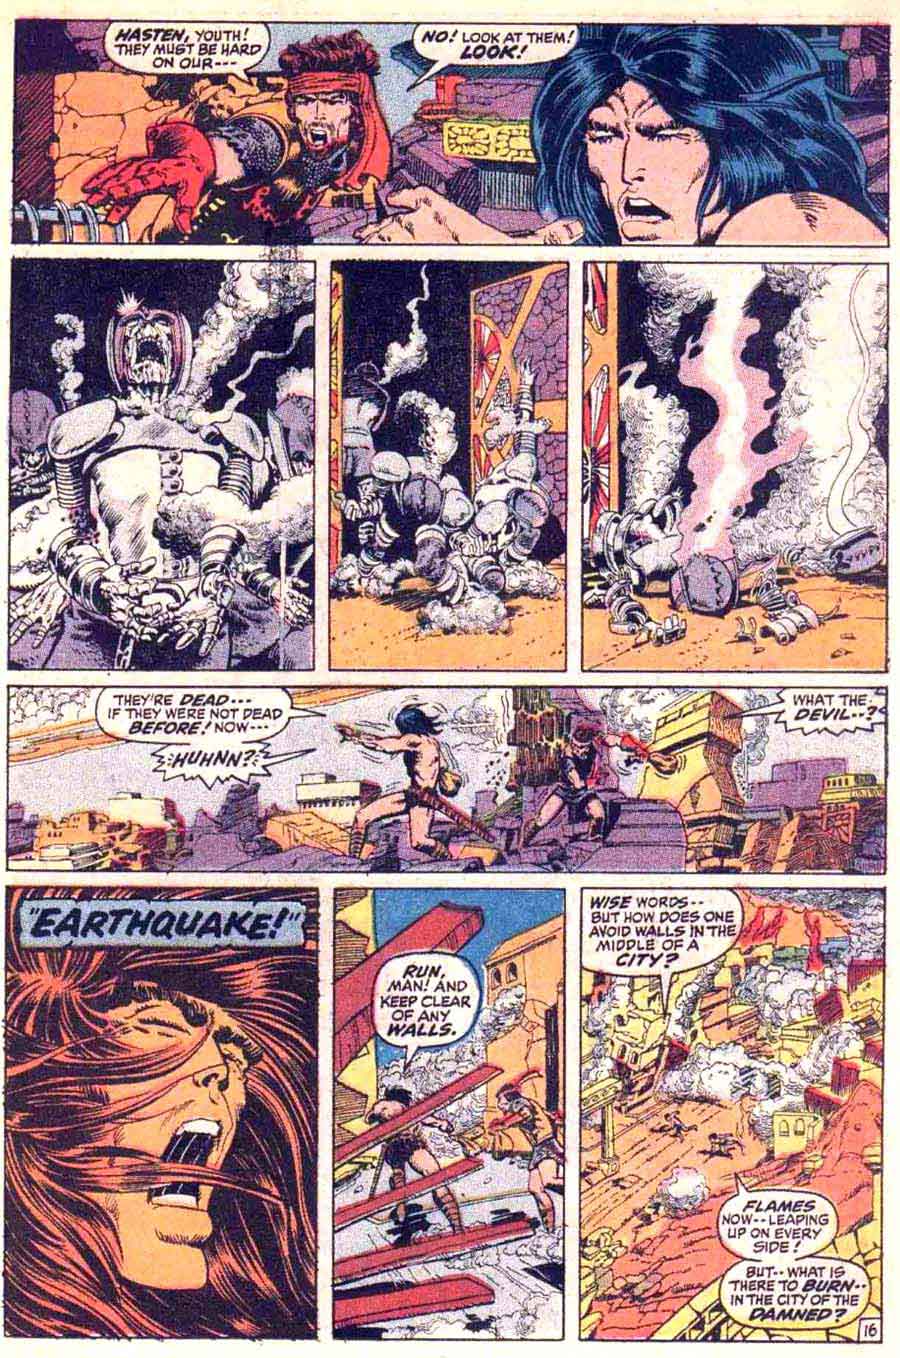 Conan the Barbarian v1 #8 marvel comic book page art by Barry Windsor Smith